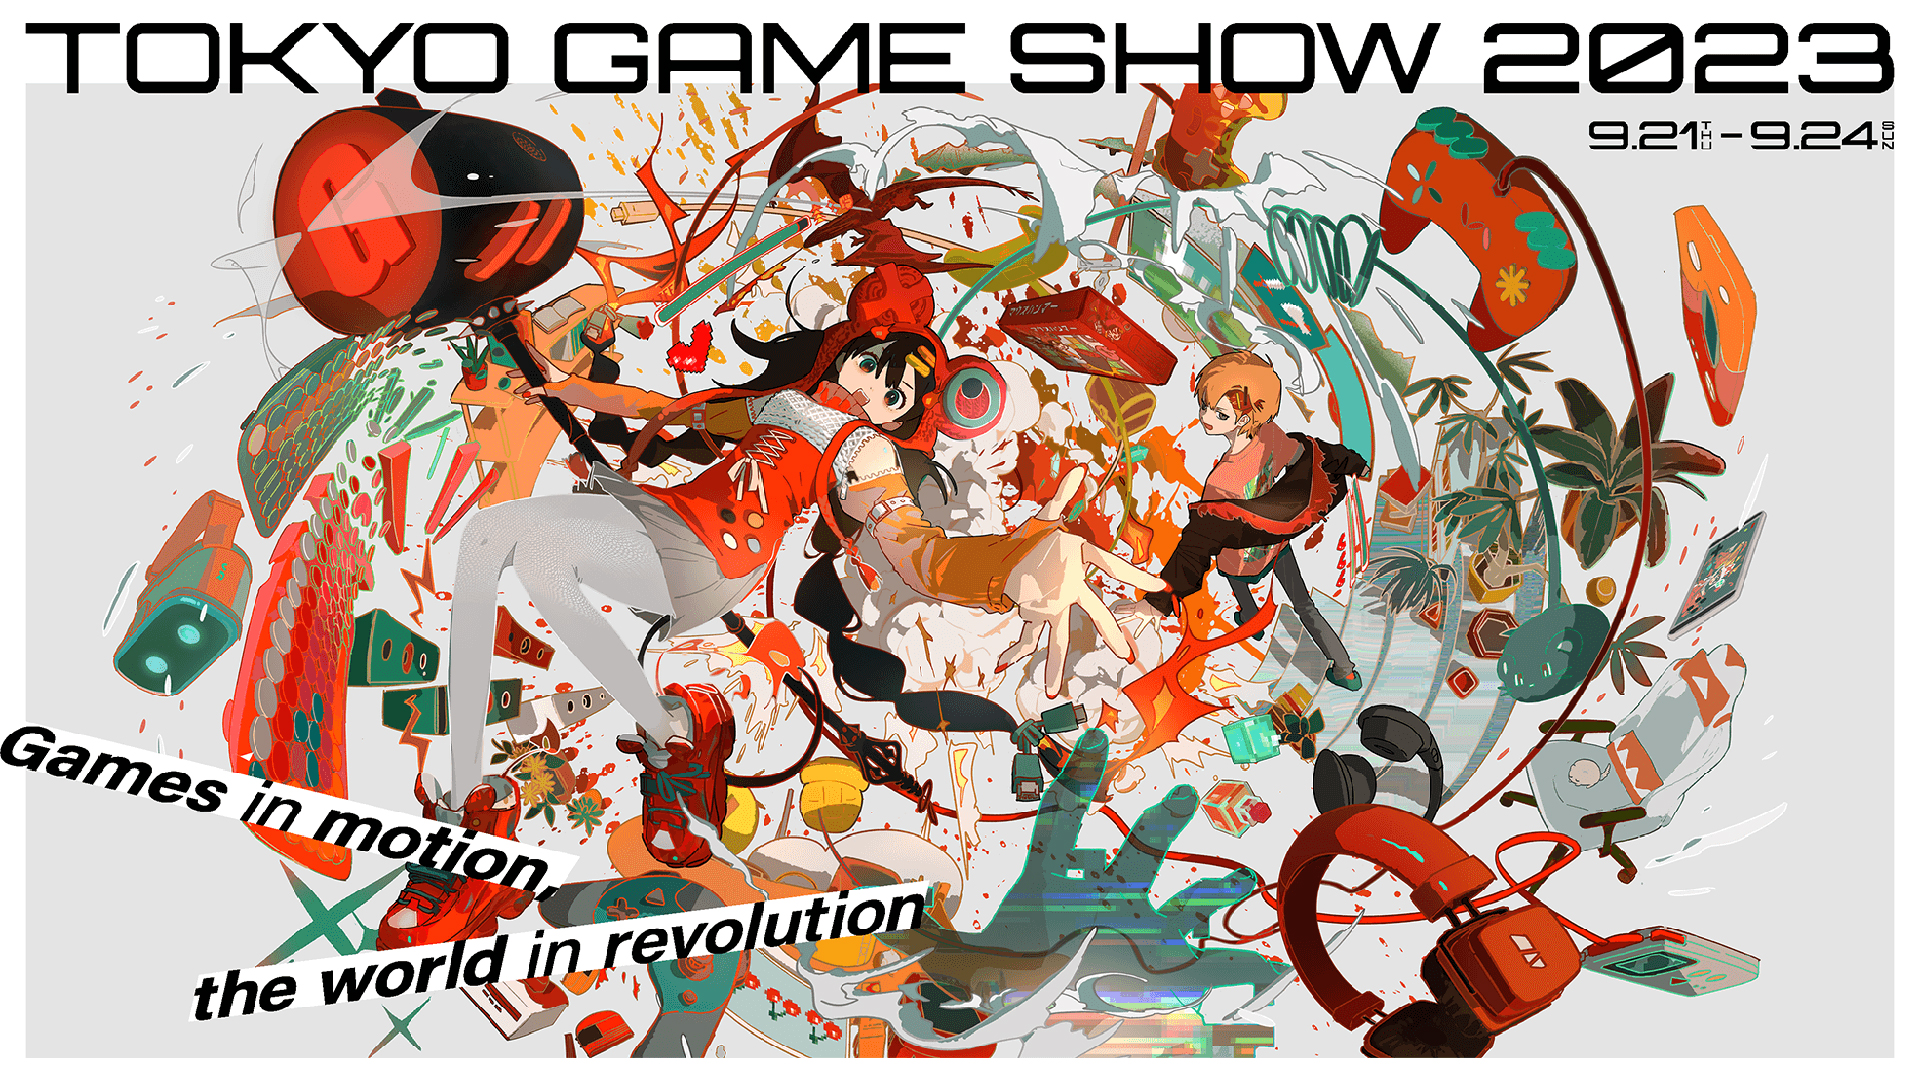 The streaming schedule for Tokyo Game Show has been released VGC